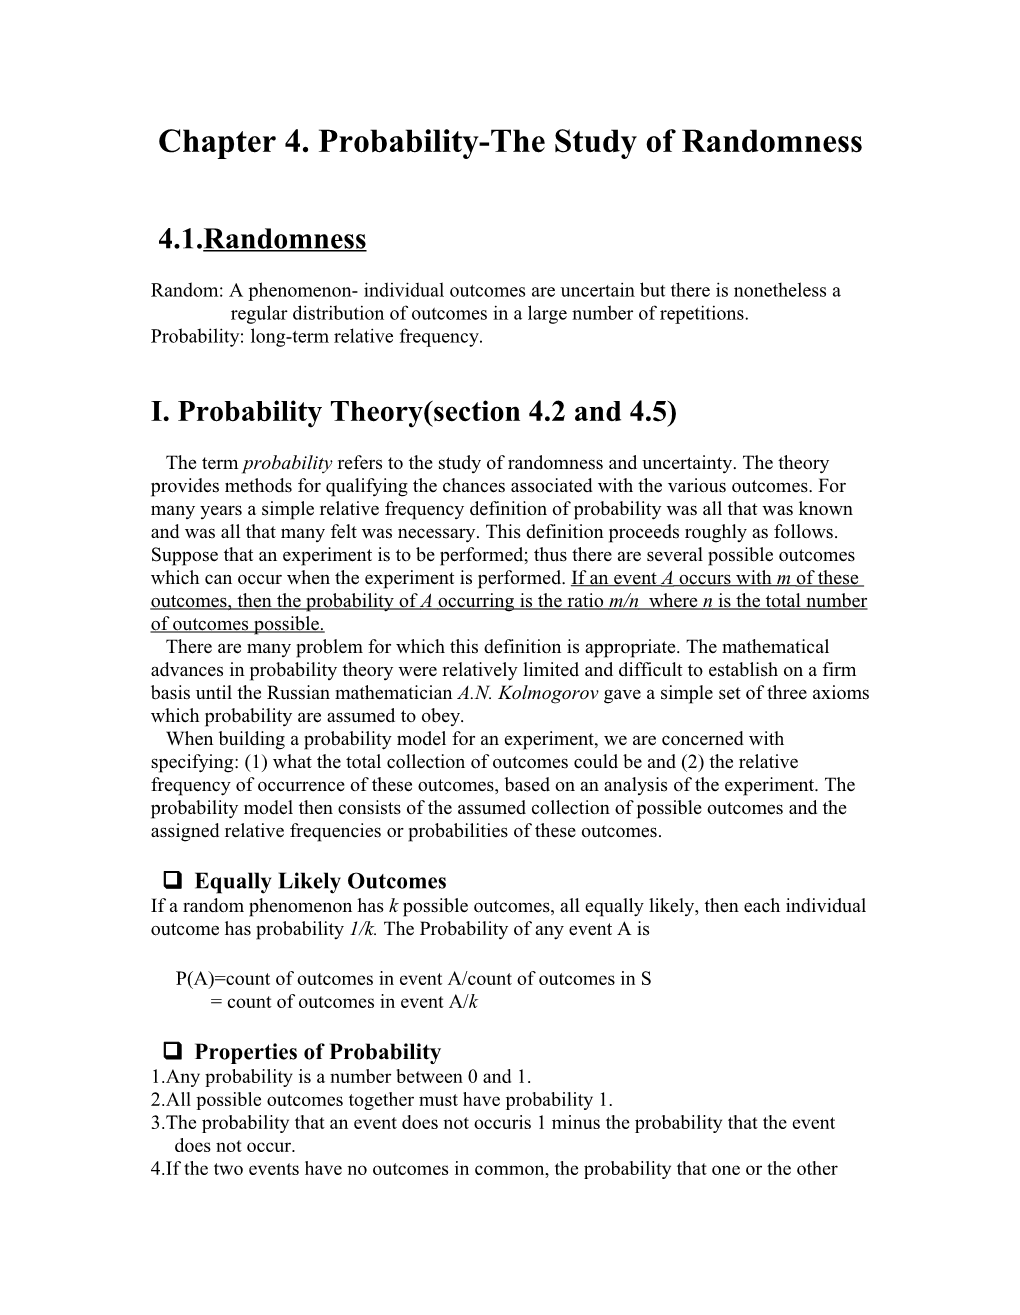 Chapter 4. Probability-The Study of Randomness